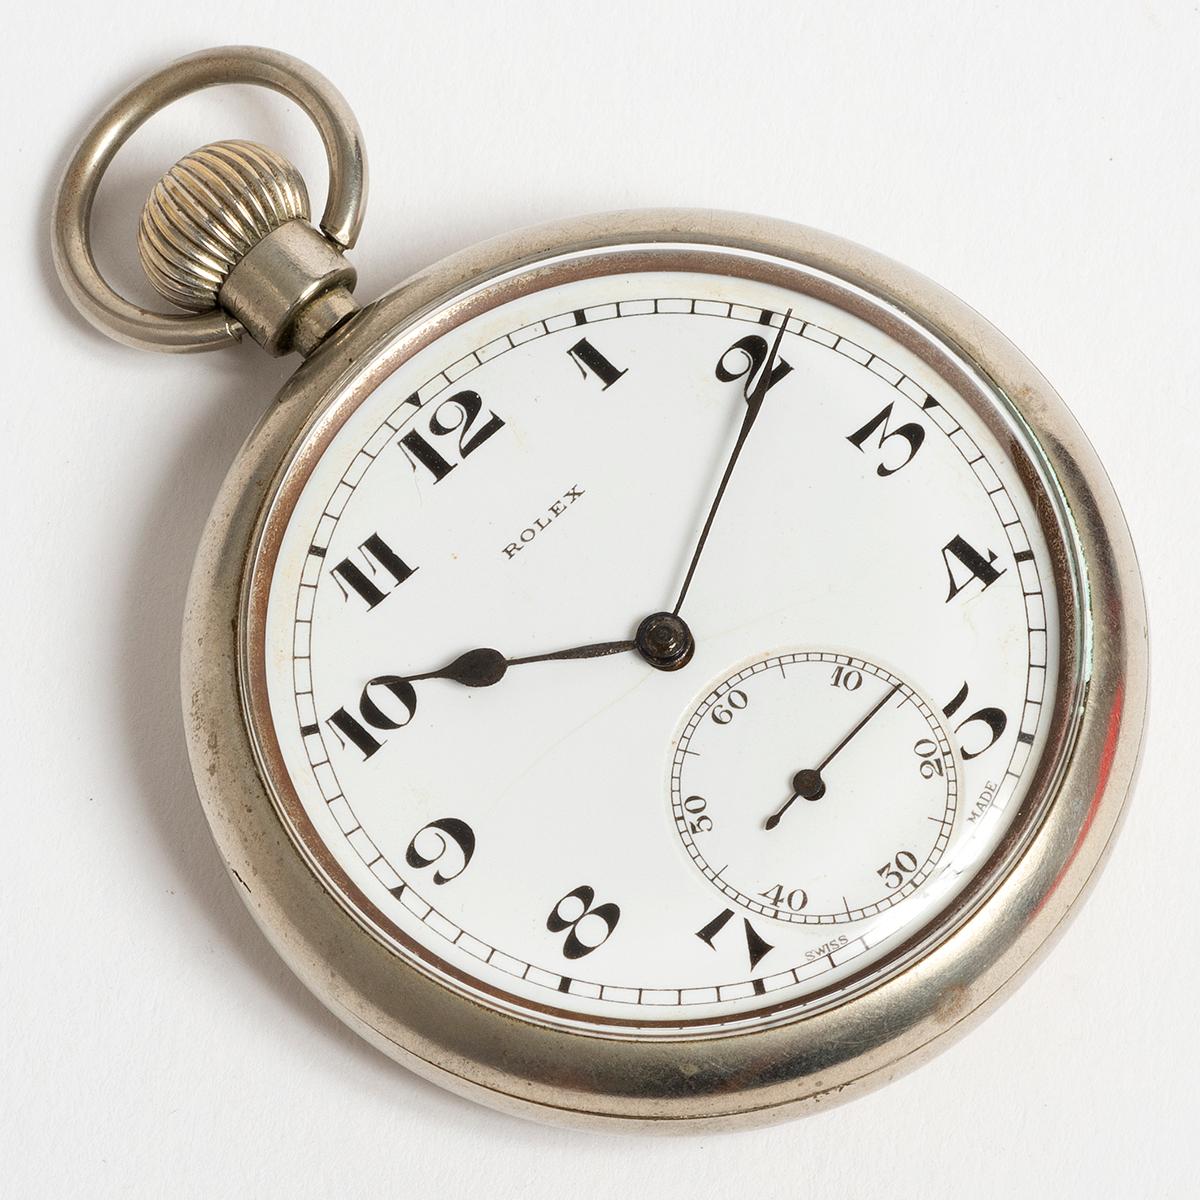 Our vintage and extremely rare pocket watch has a cal. 590 Rolex movement and case by Calcort. A late military request for these pocket watches, during WW2 led to a rush for precision Rolex movements, and steel casing to be ready for issue. This